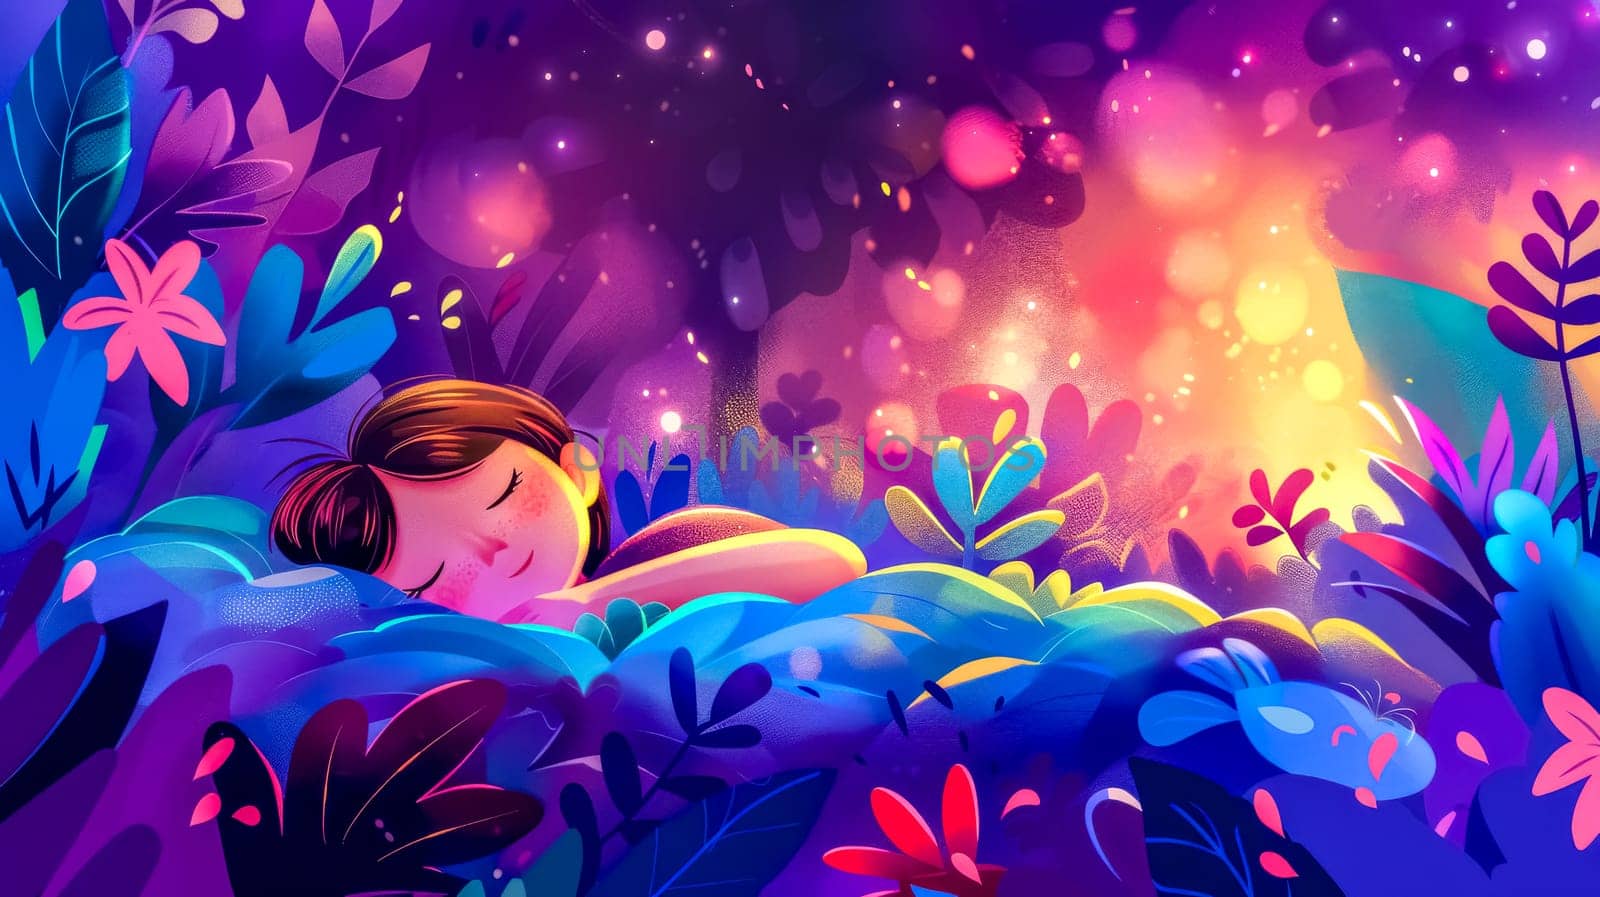 Colorful artwork of a peaceful young child asleep in a magical forest setting